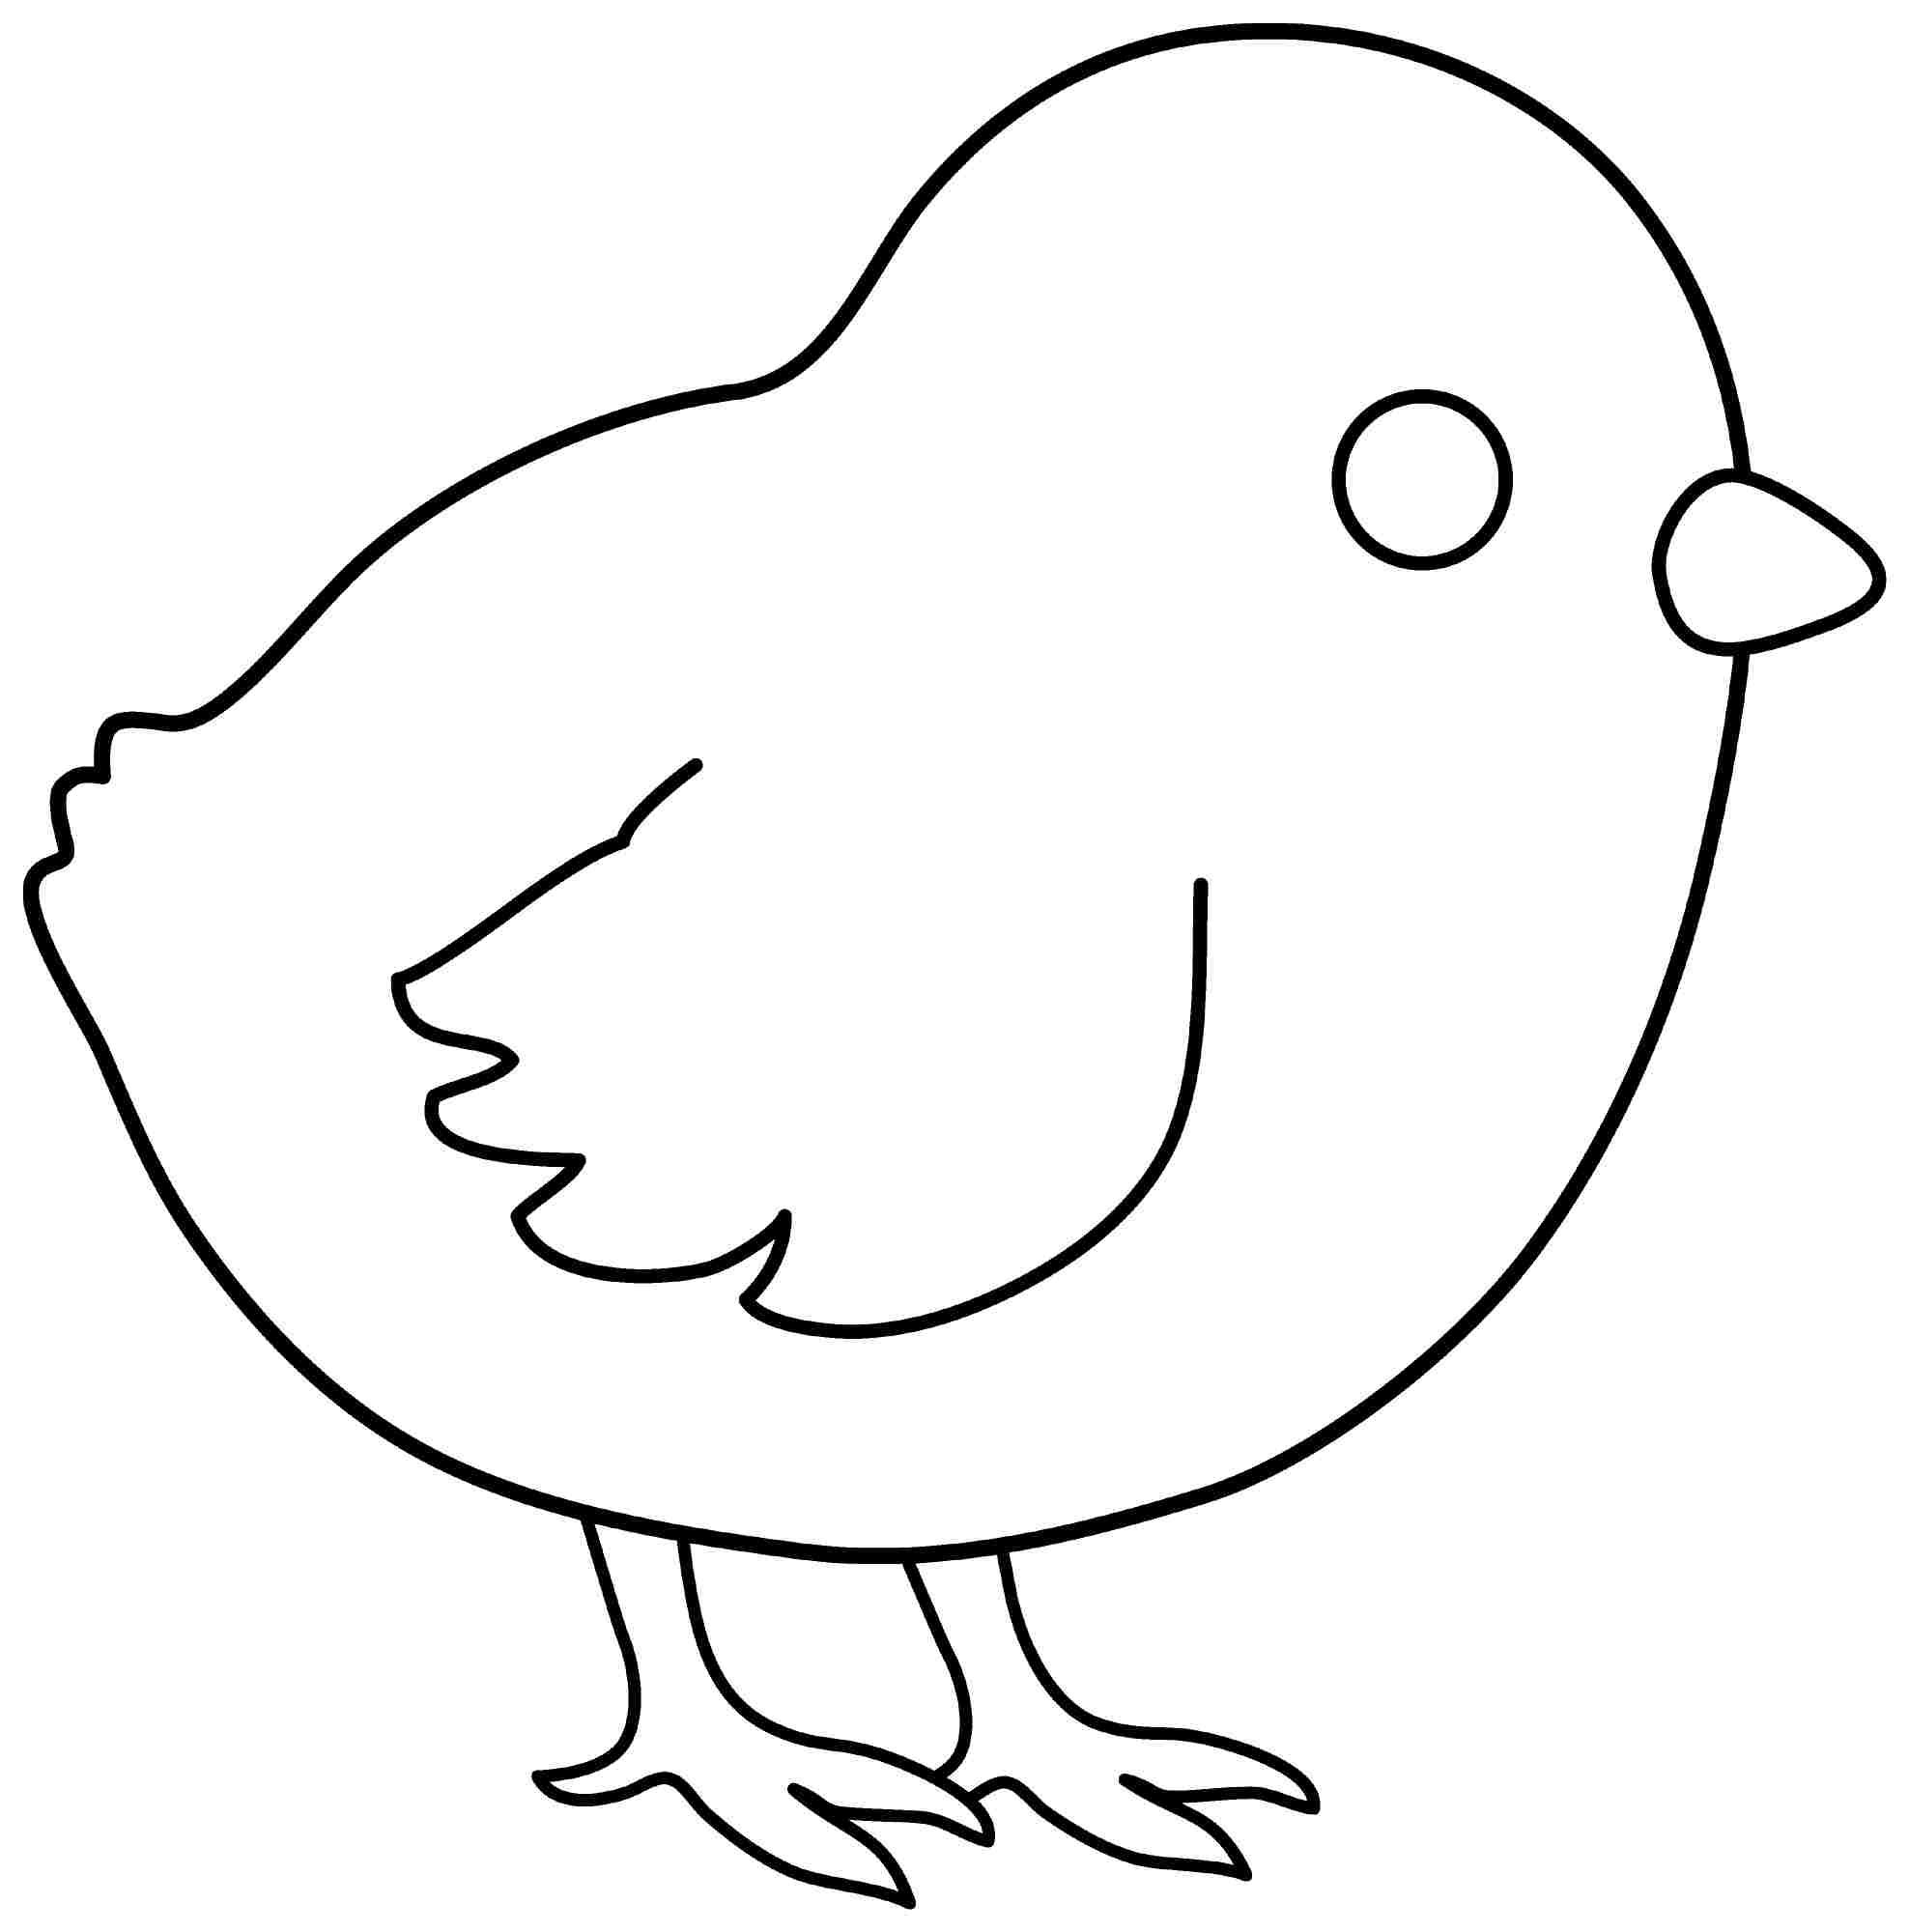 7 Best Images of Printable Chick And Chicken - Baby Chick Outline ...